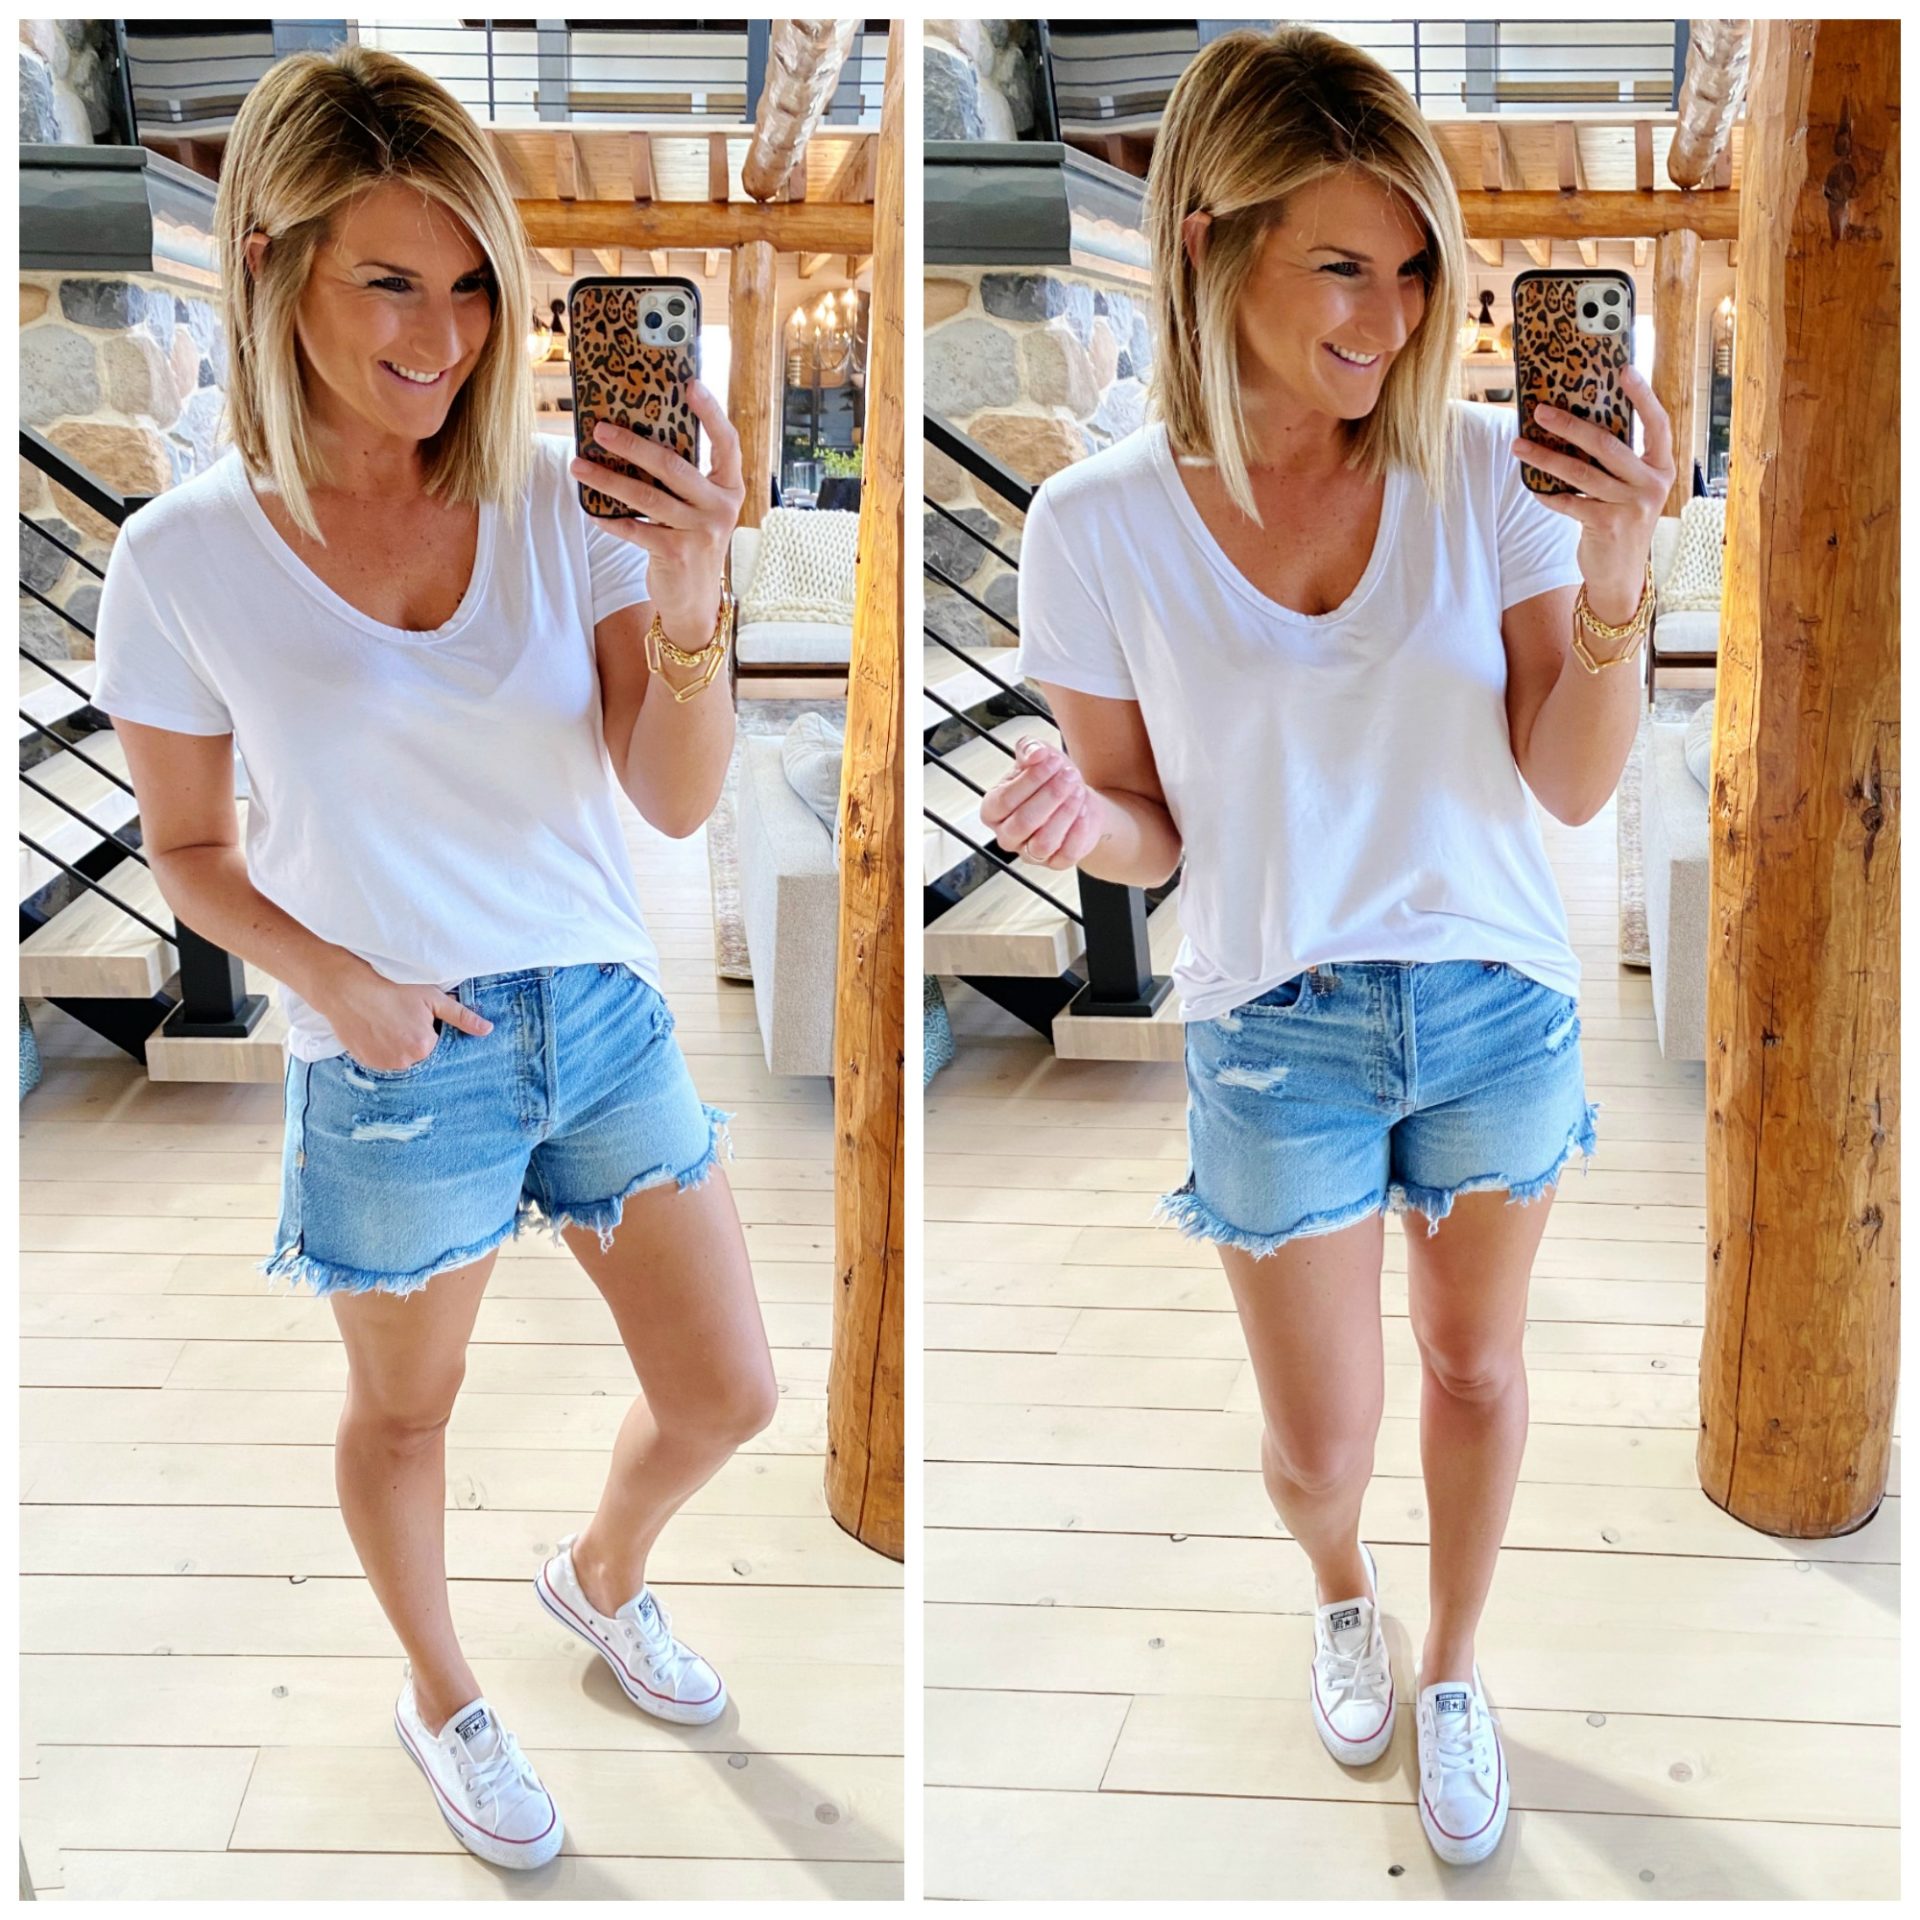 Matching my sneakers and shorts – Bay Area Fashionista